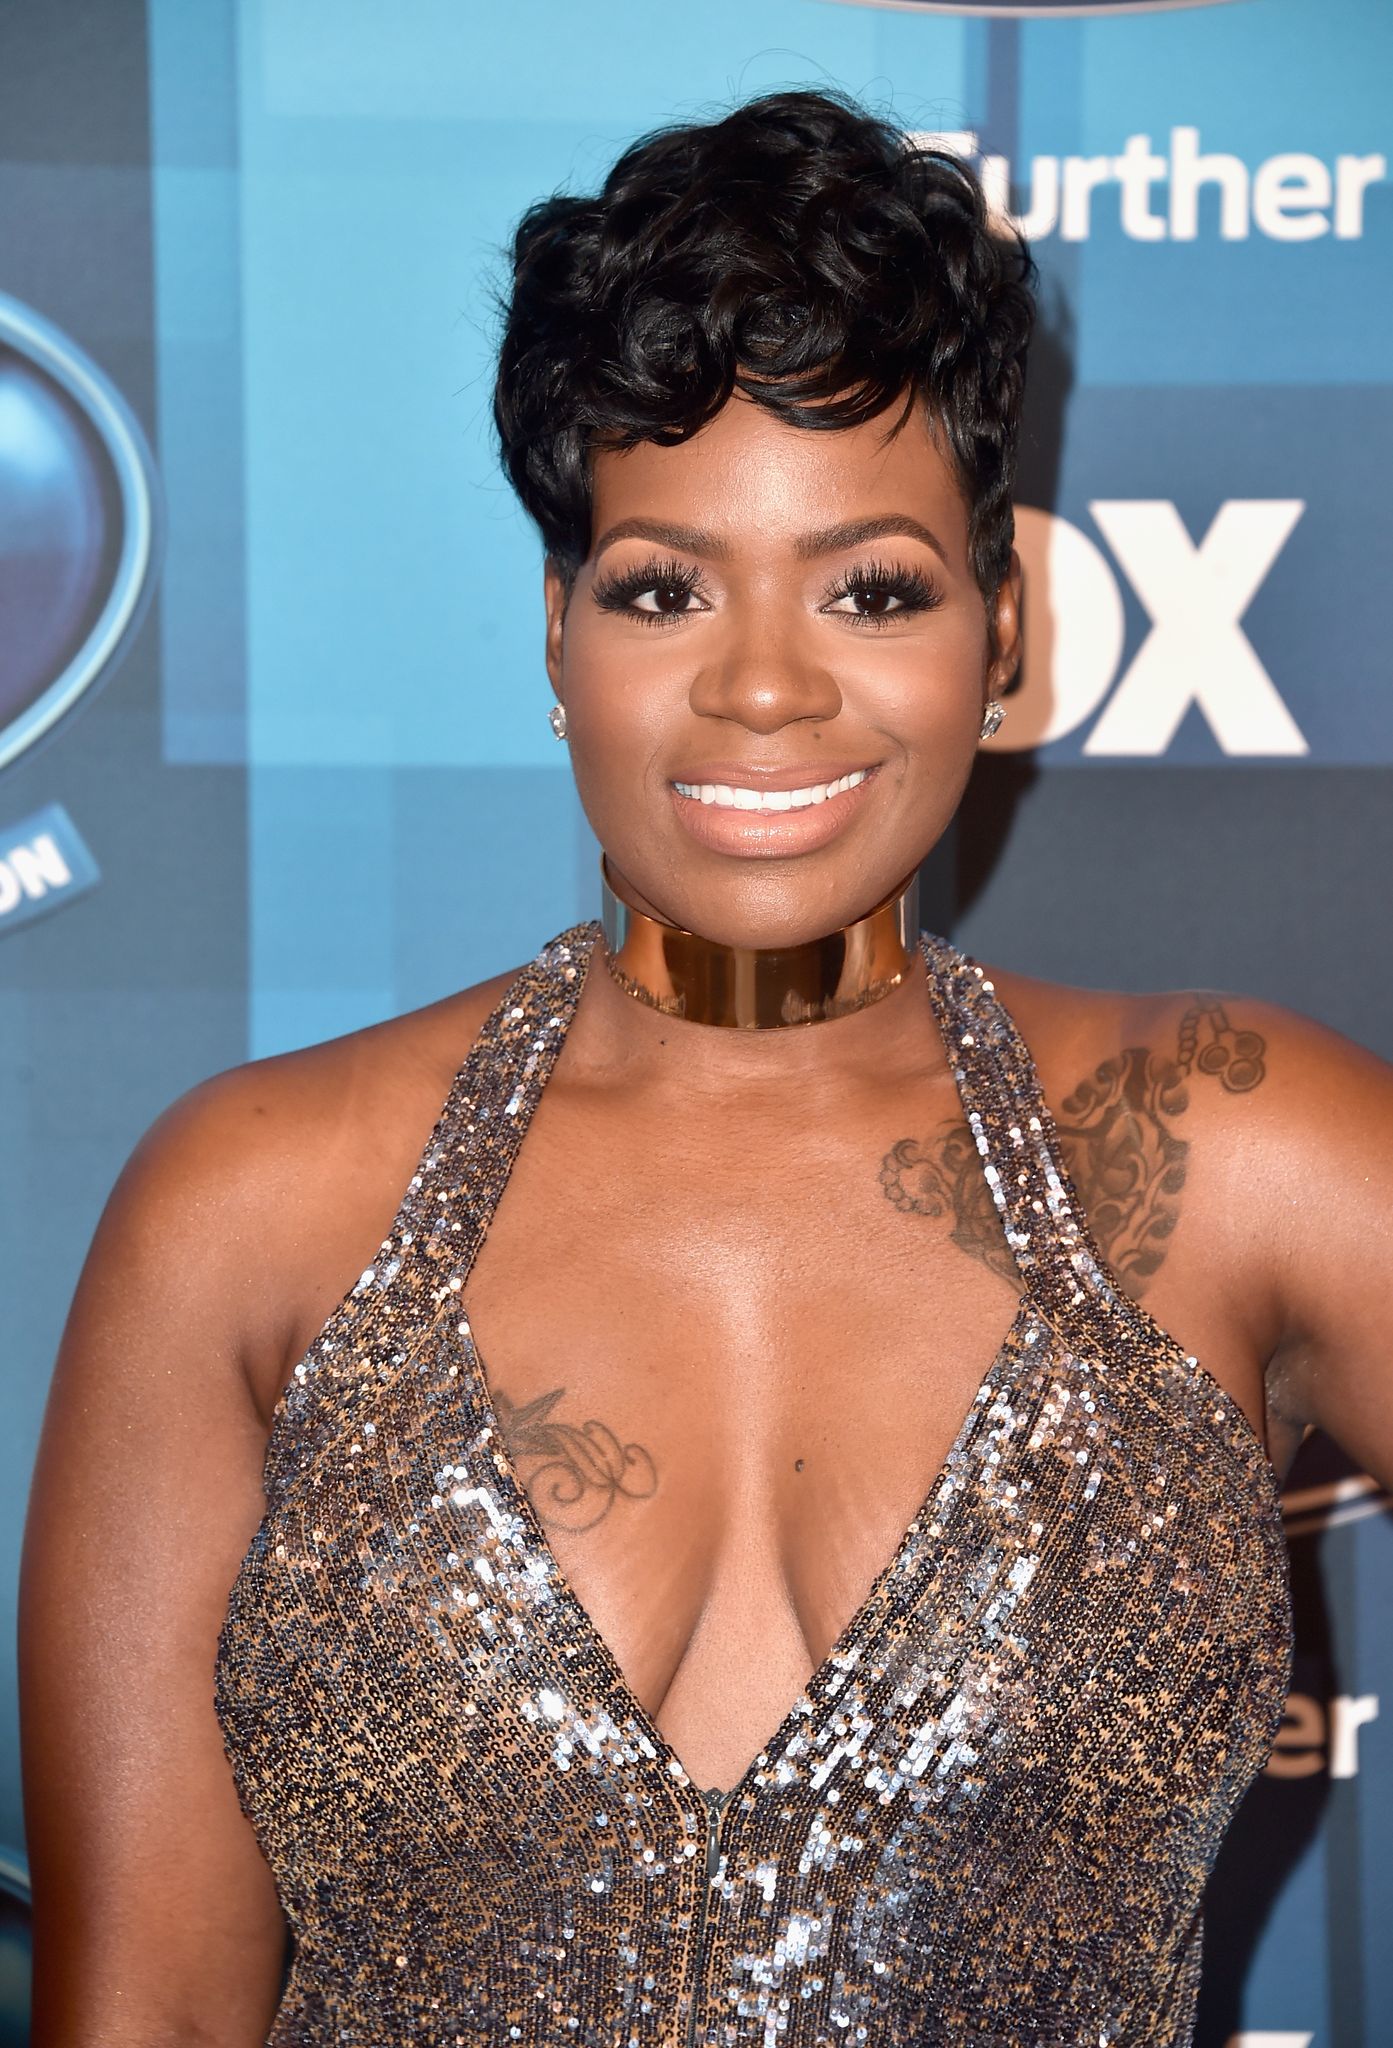 Fantasia at the finale of "American Idol" on April 7, 2016. | Photo: Getty Images